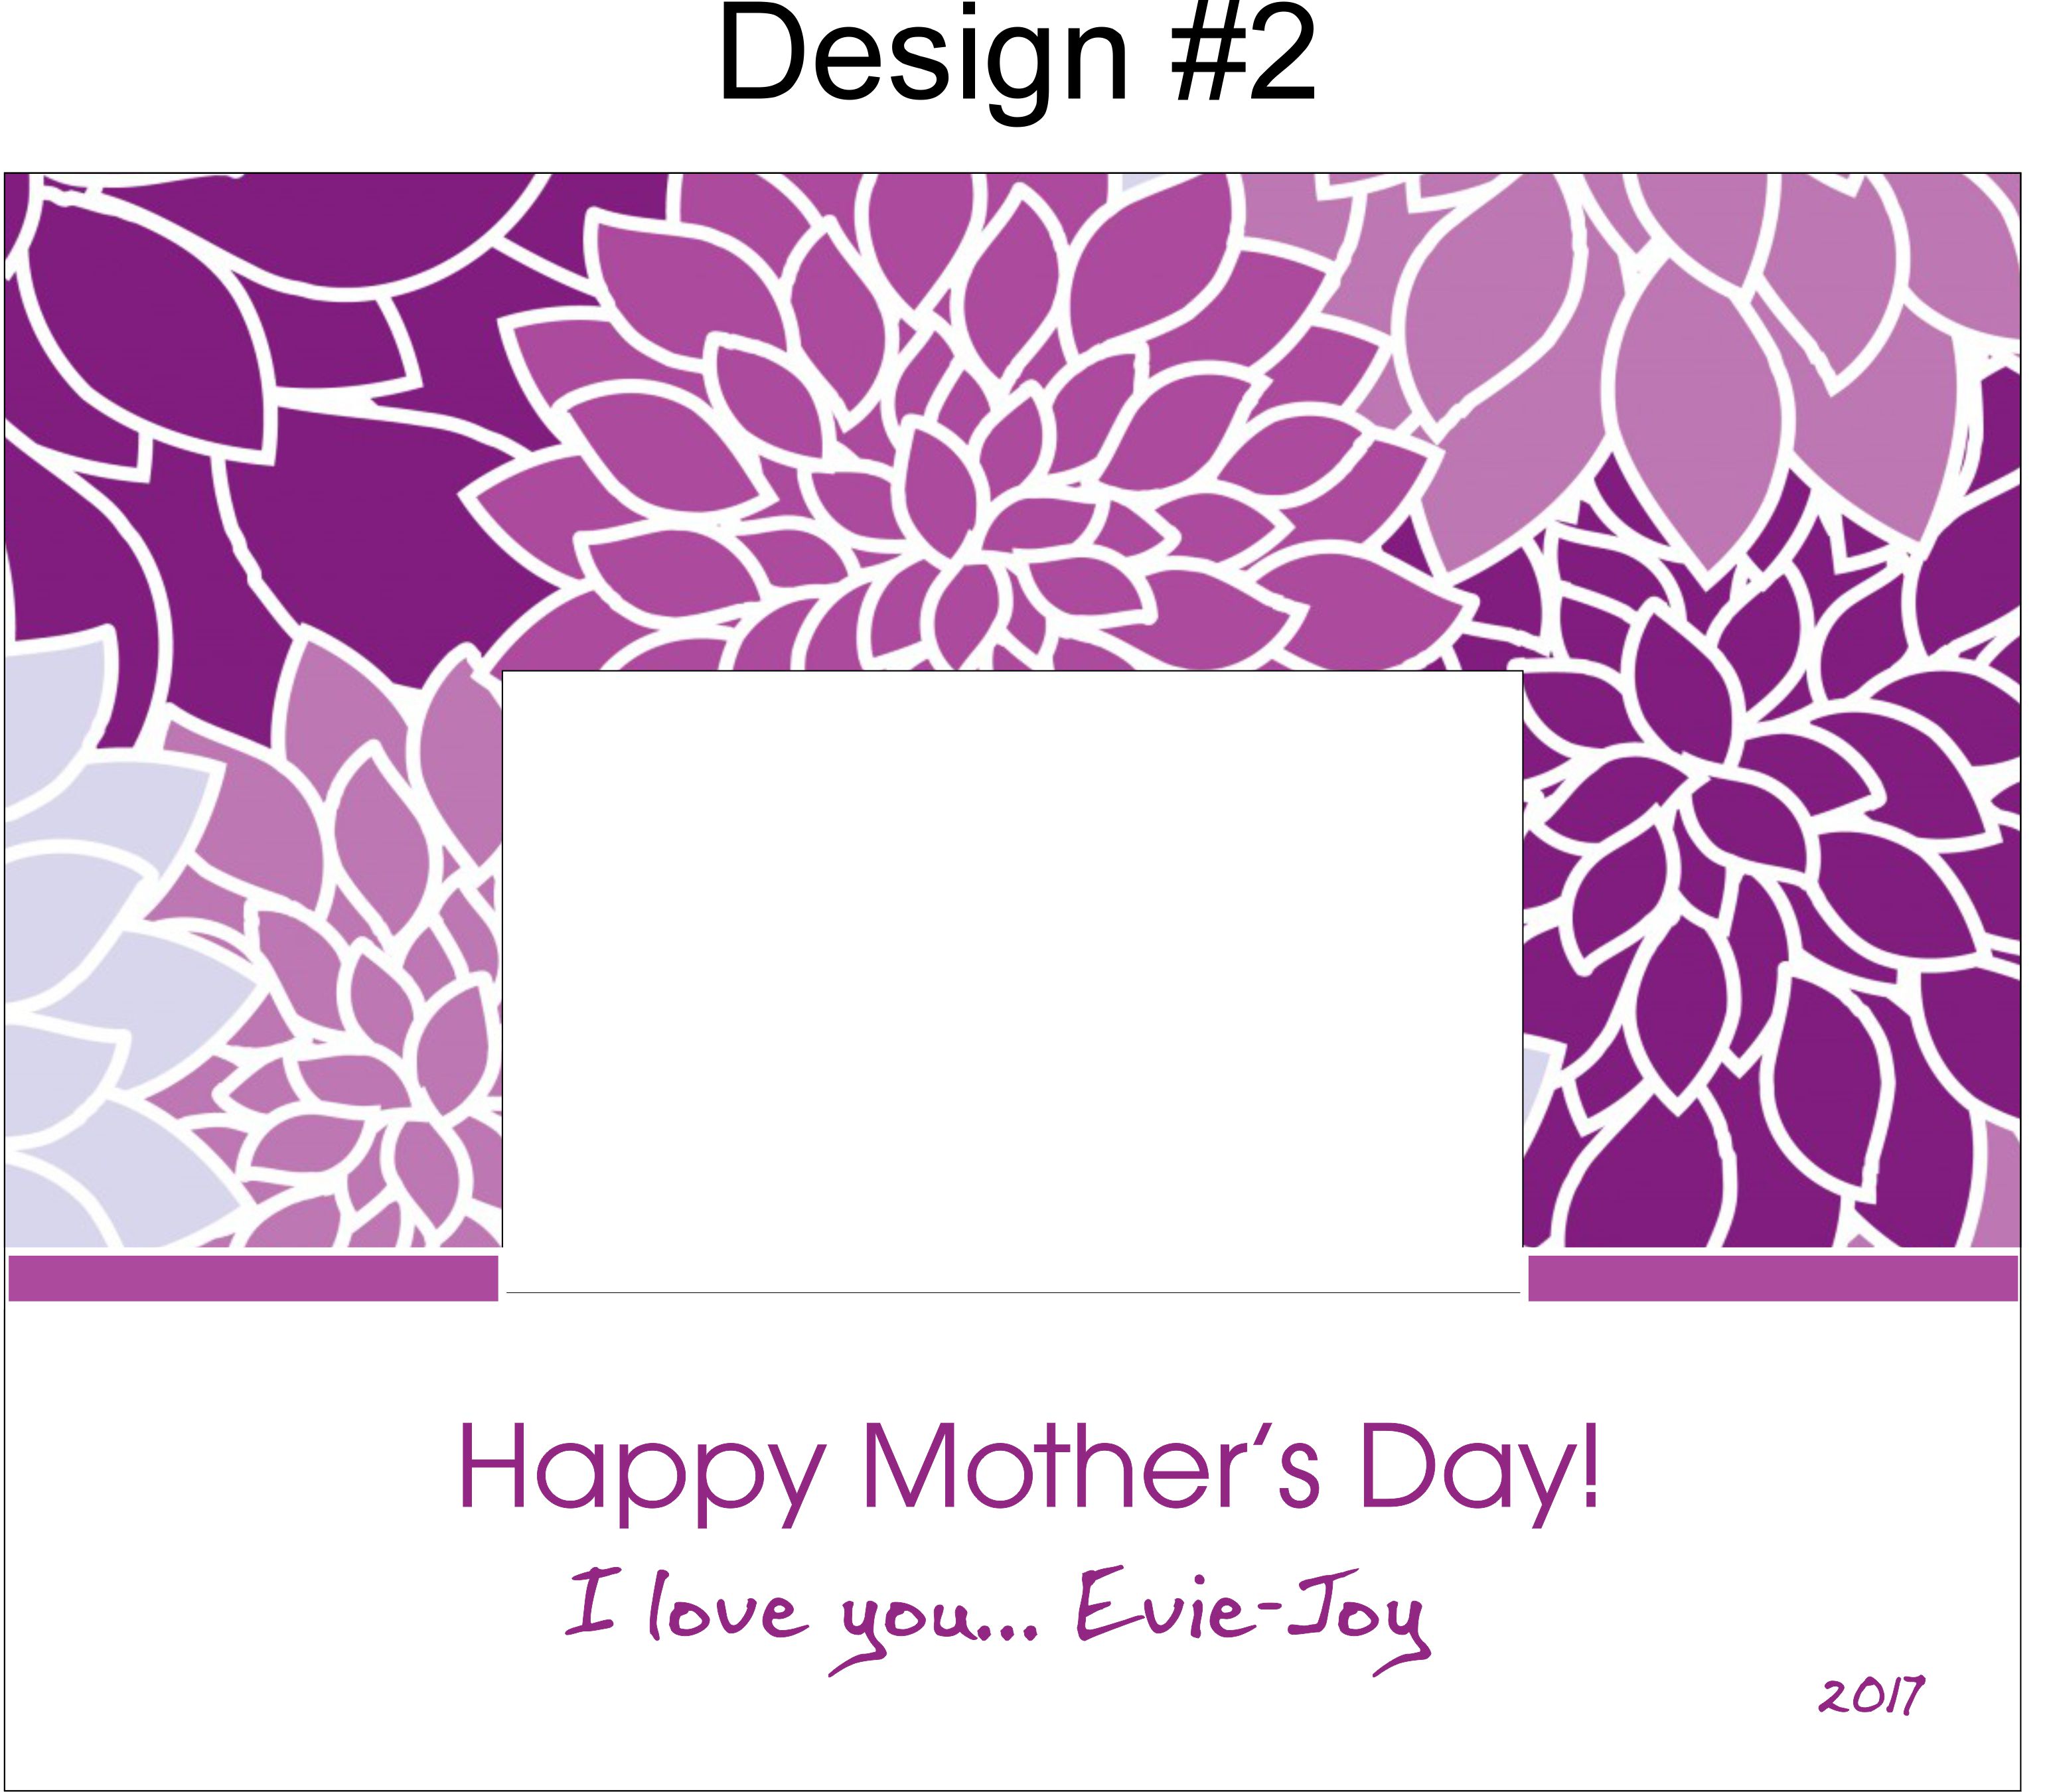 happy-mother-s-day-picture-frame-customize-nation